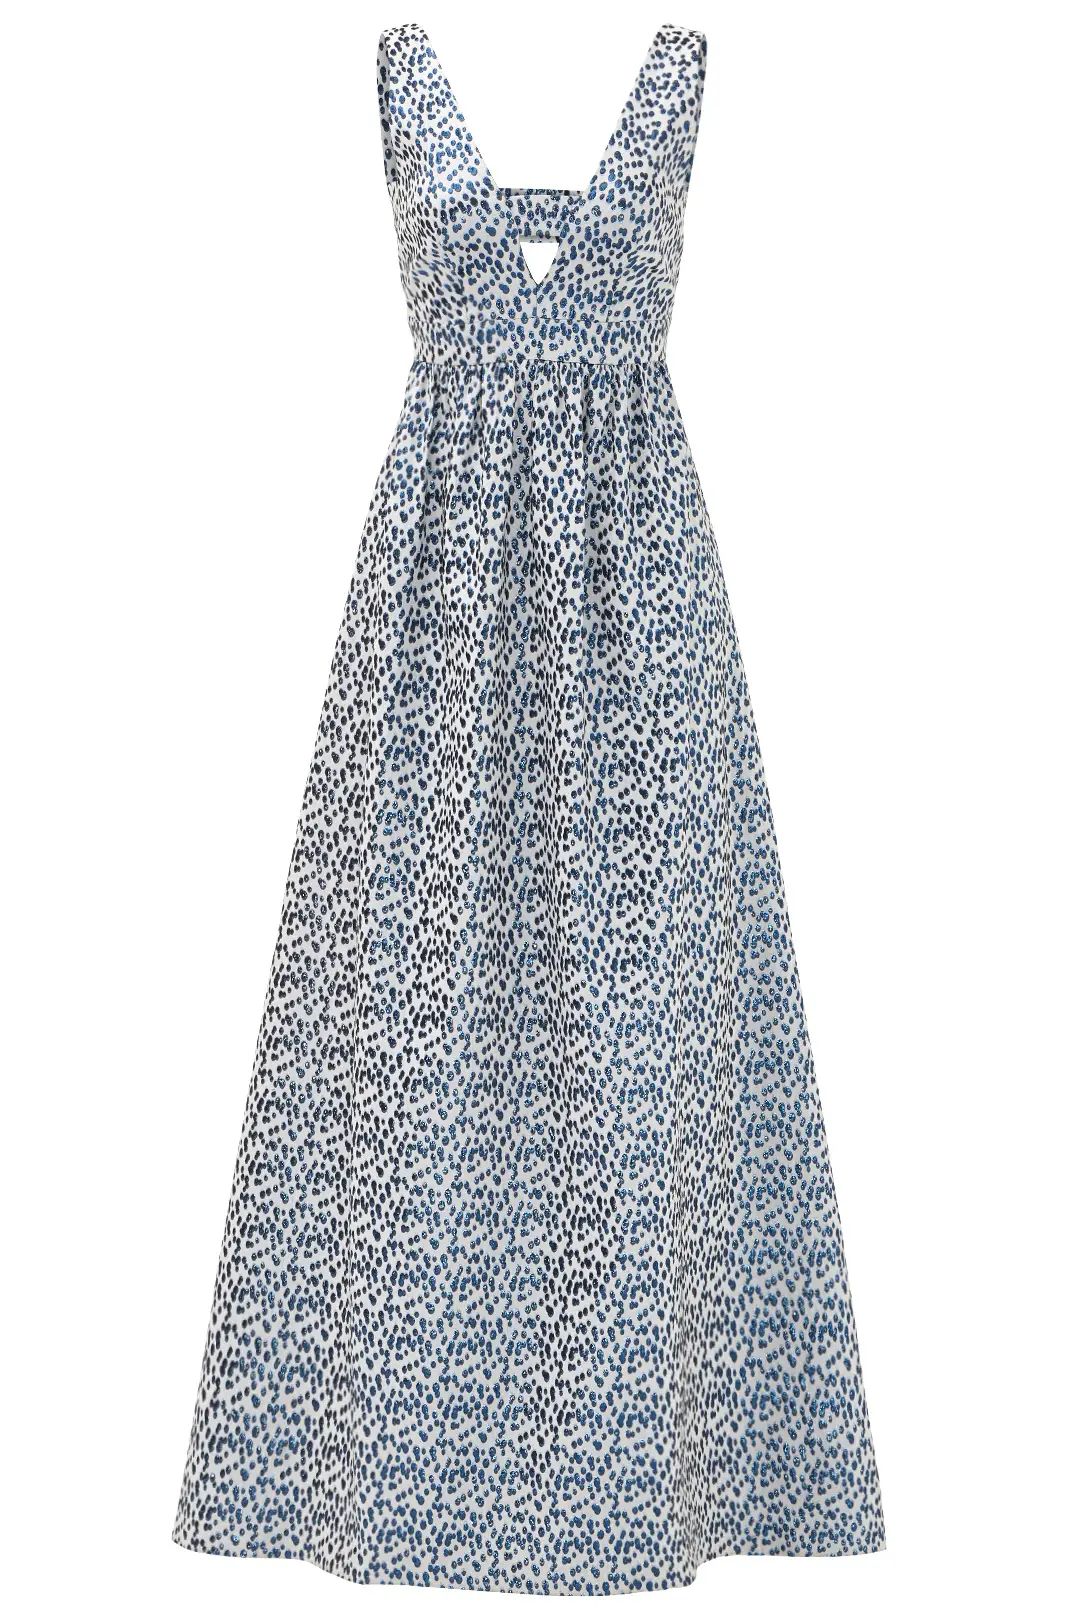 Nicole Miller Blue Printed Jacquard Gown | Rent The Runway